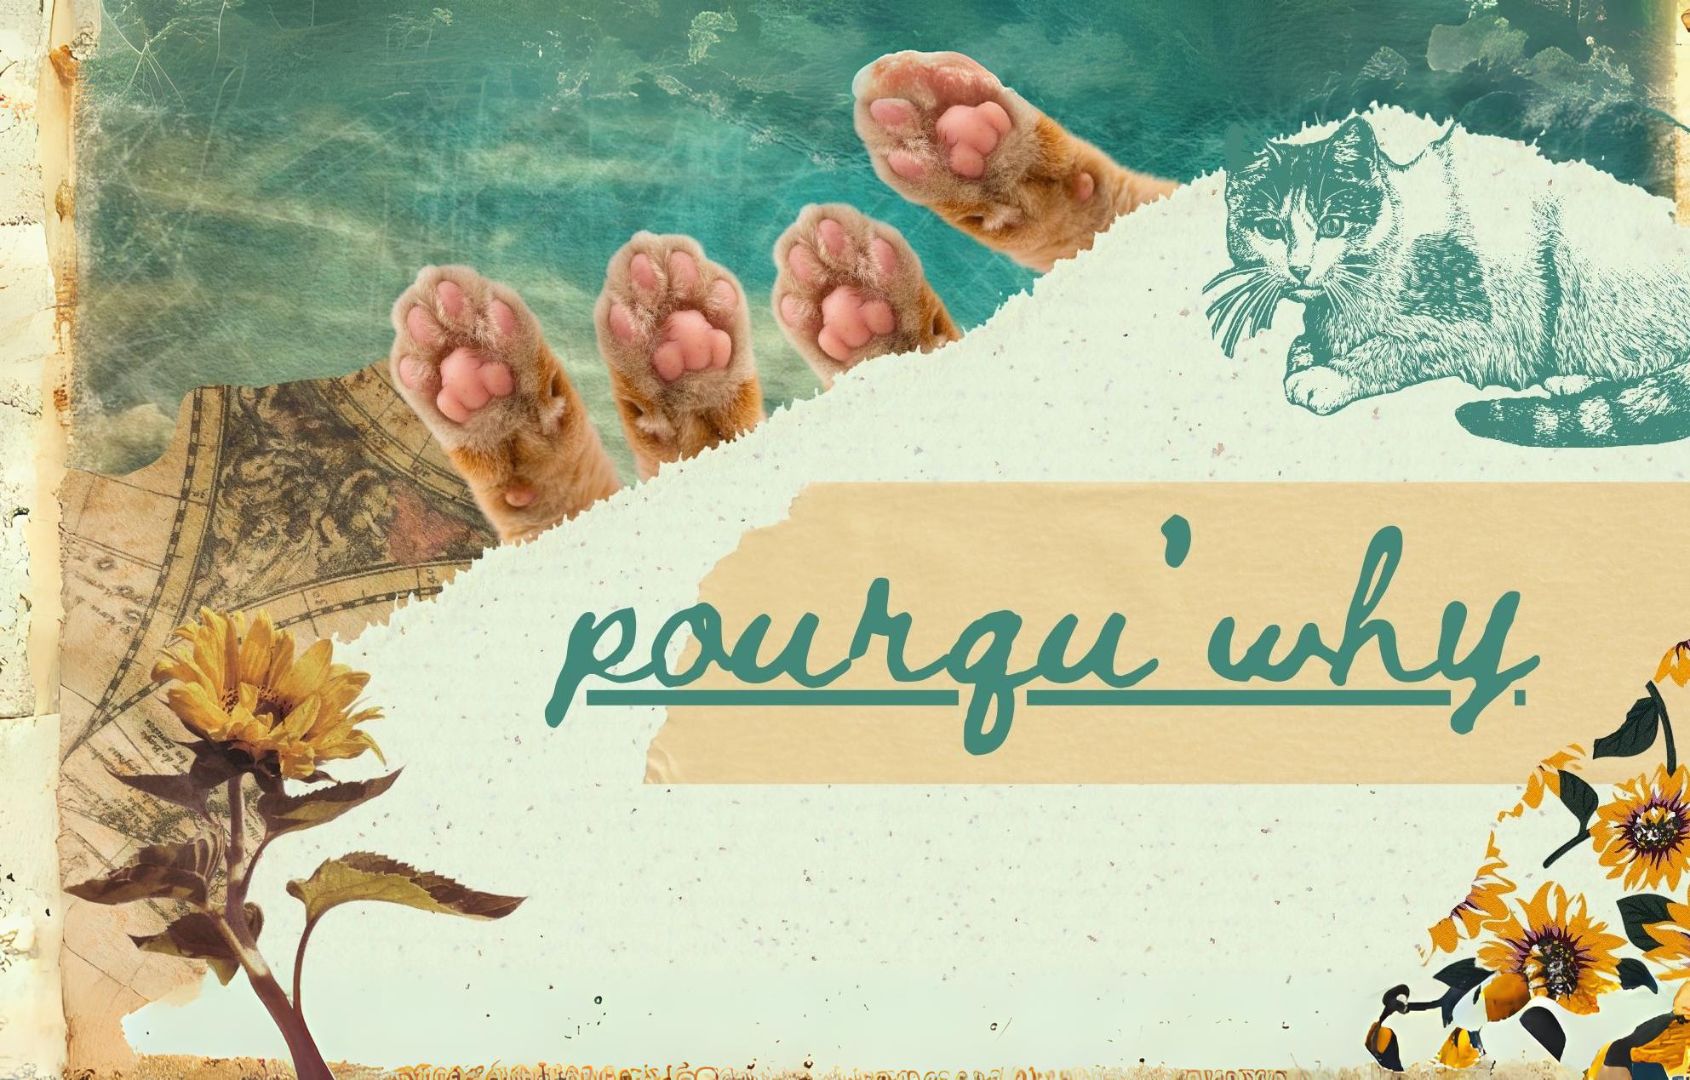 Pourqu’why | Cat’s Meow